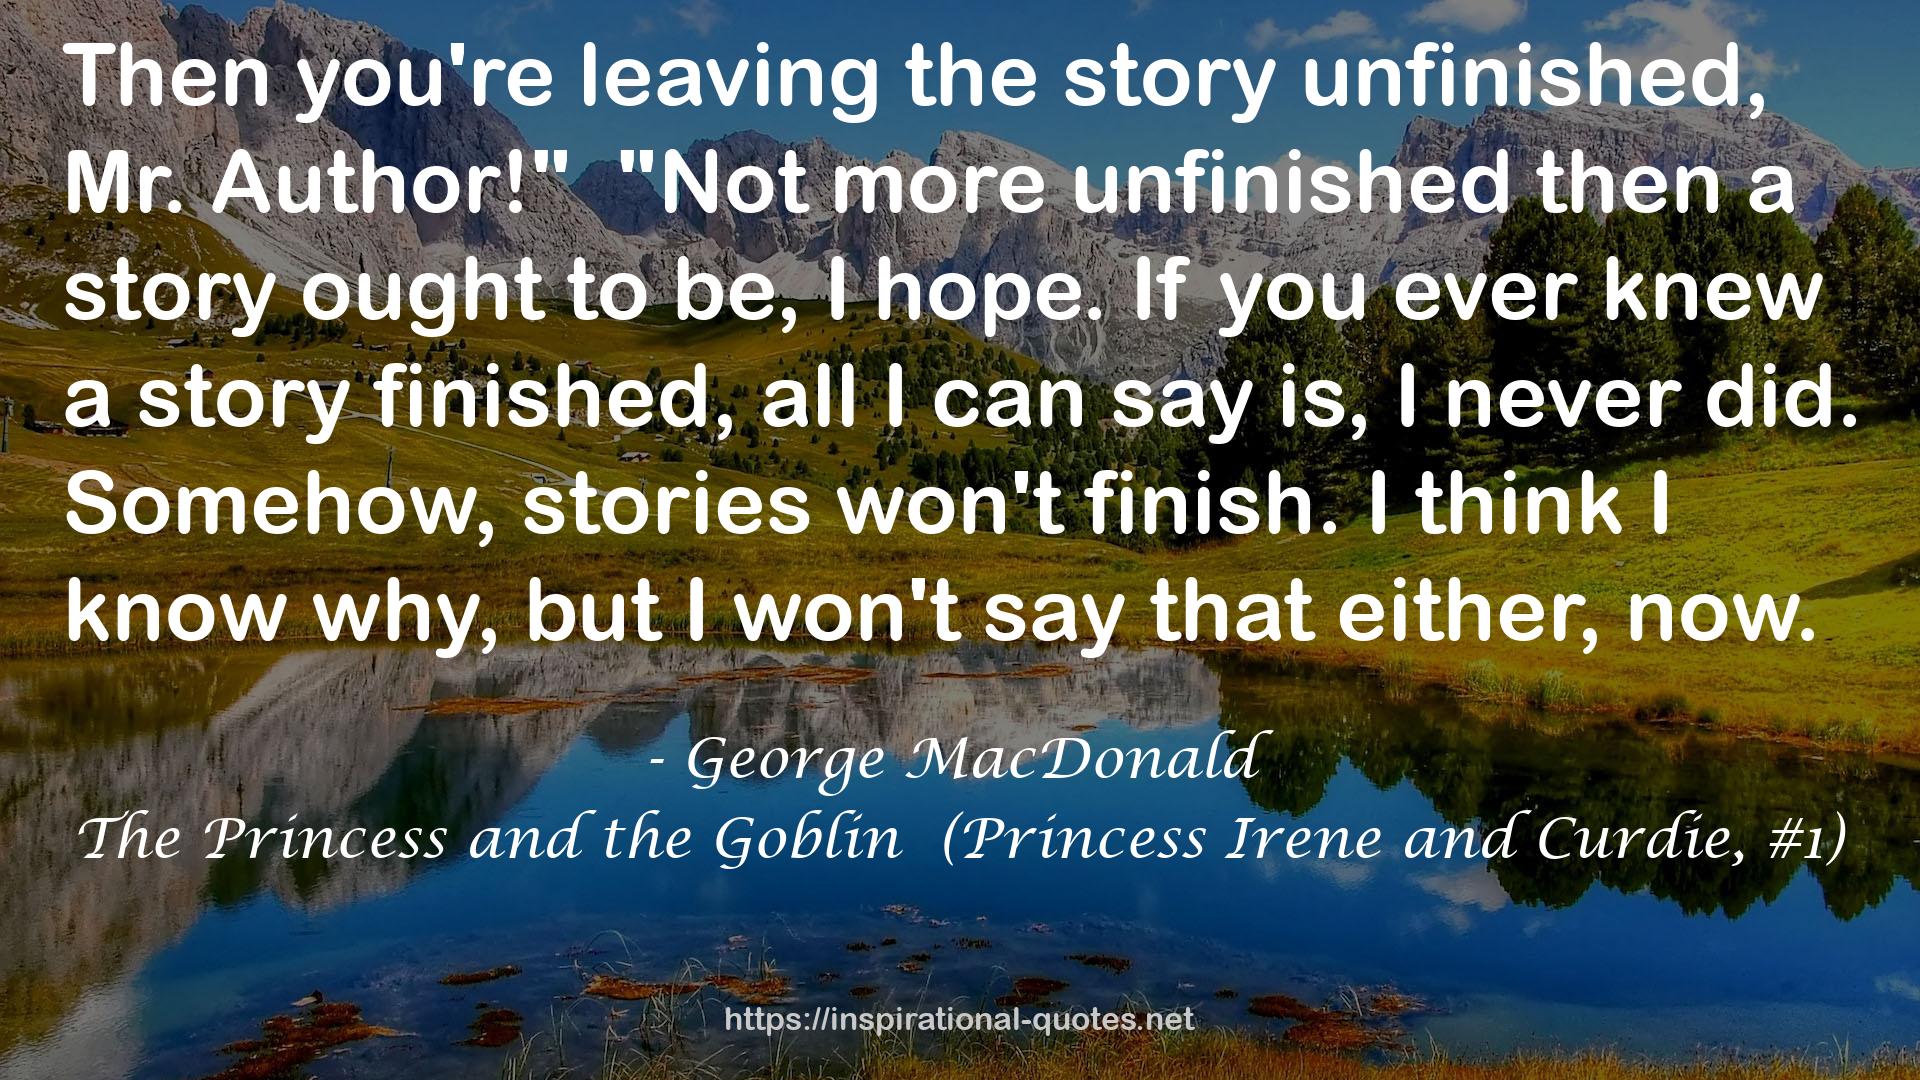 The Princess and the Goblin  (Princess Irene and Curdie, #1) QUOTES